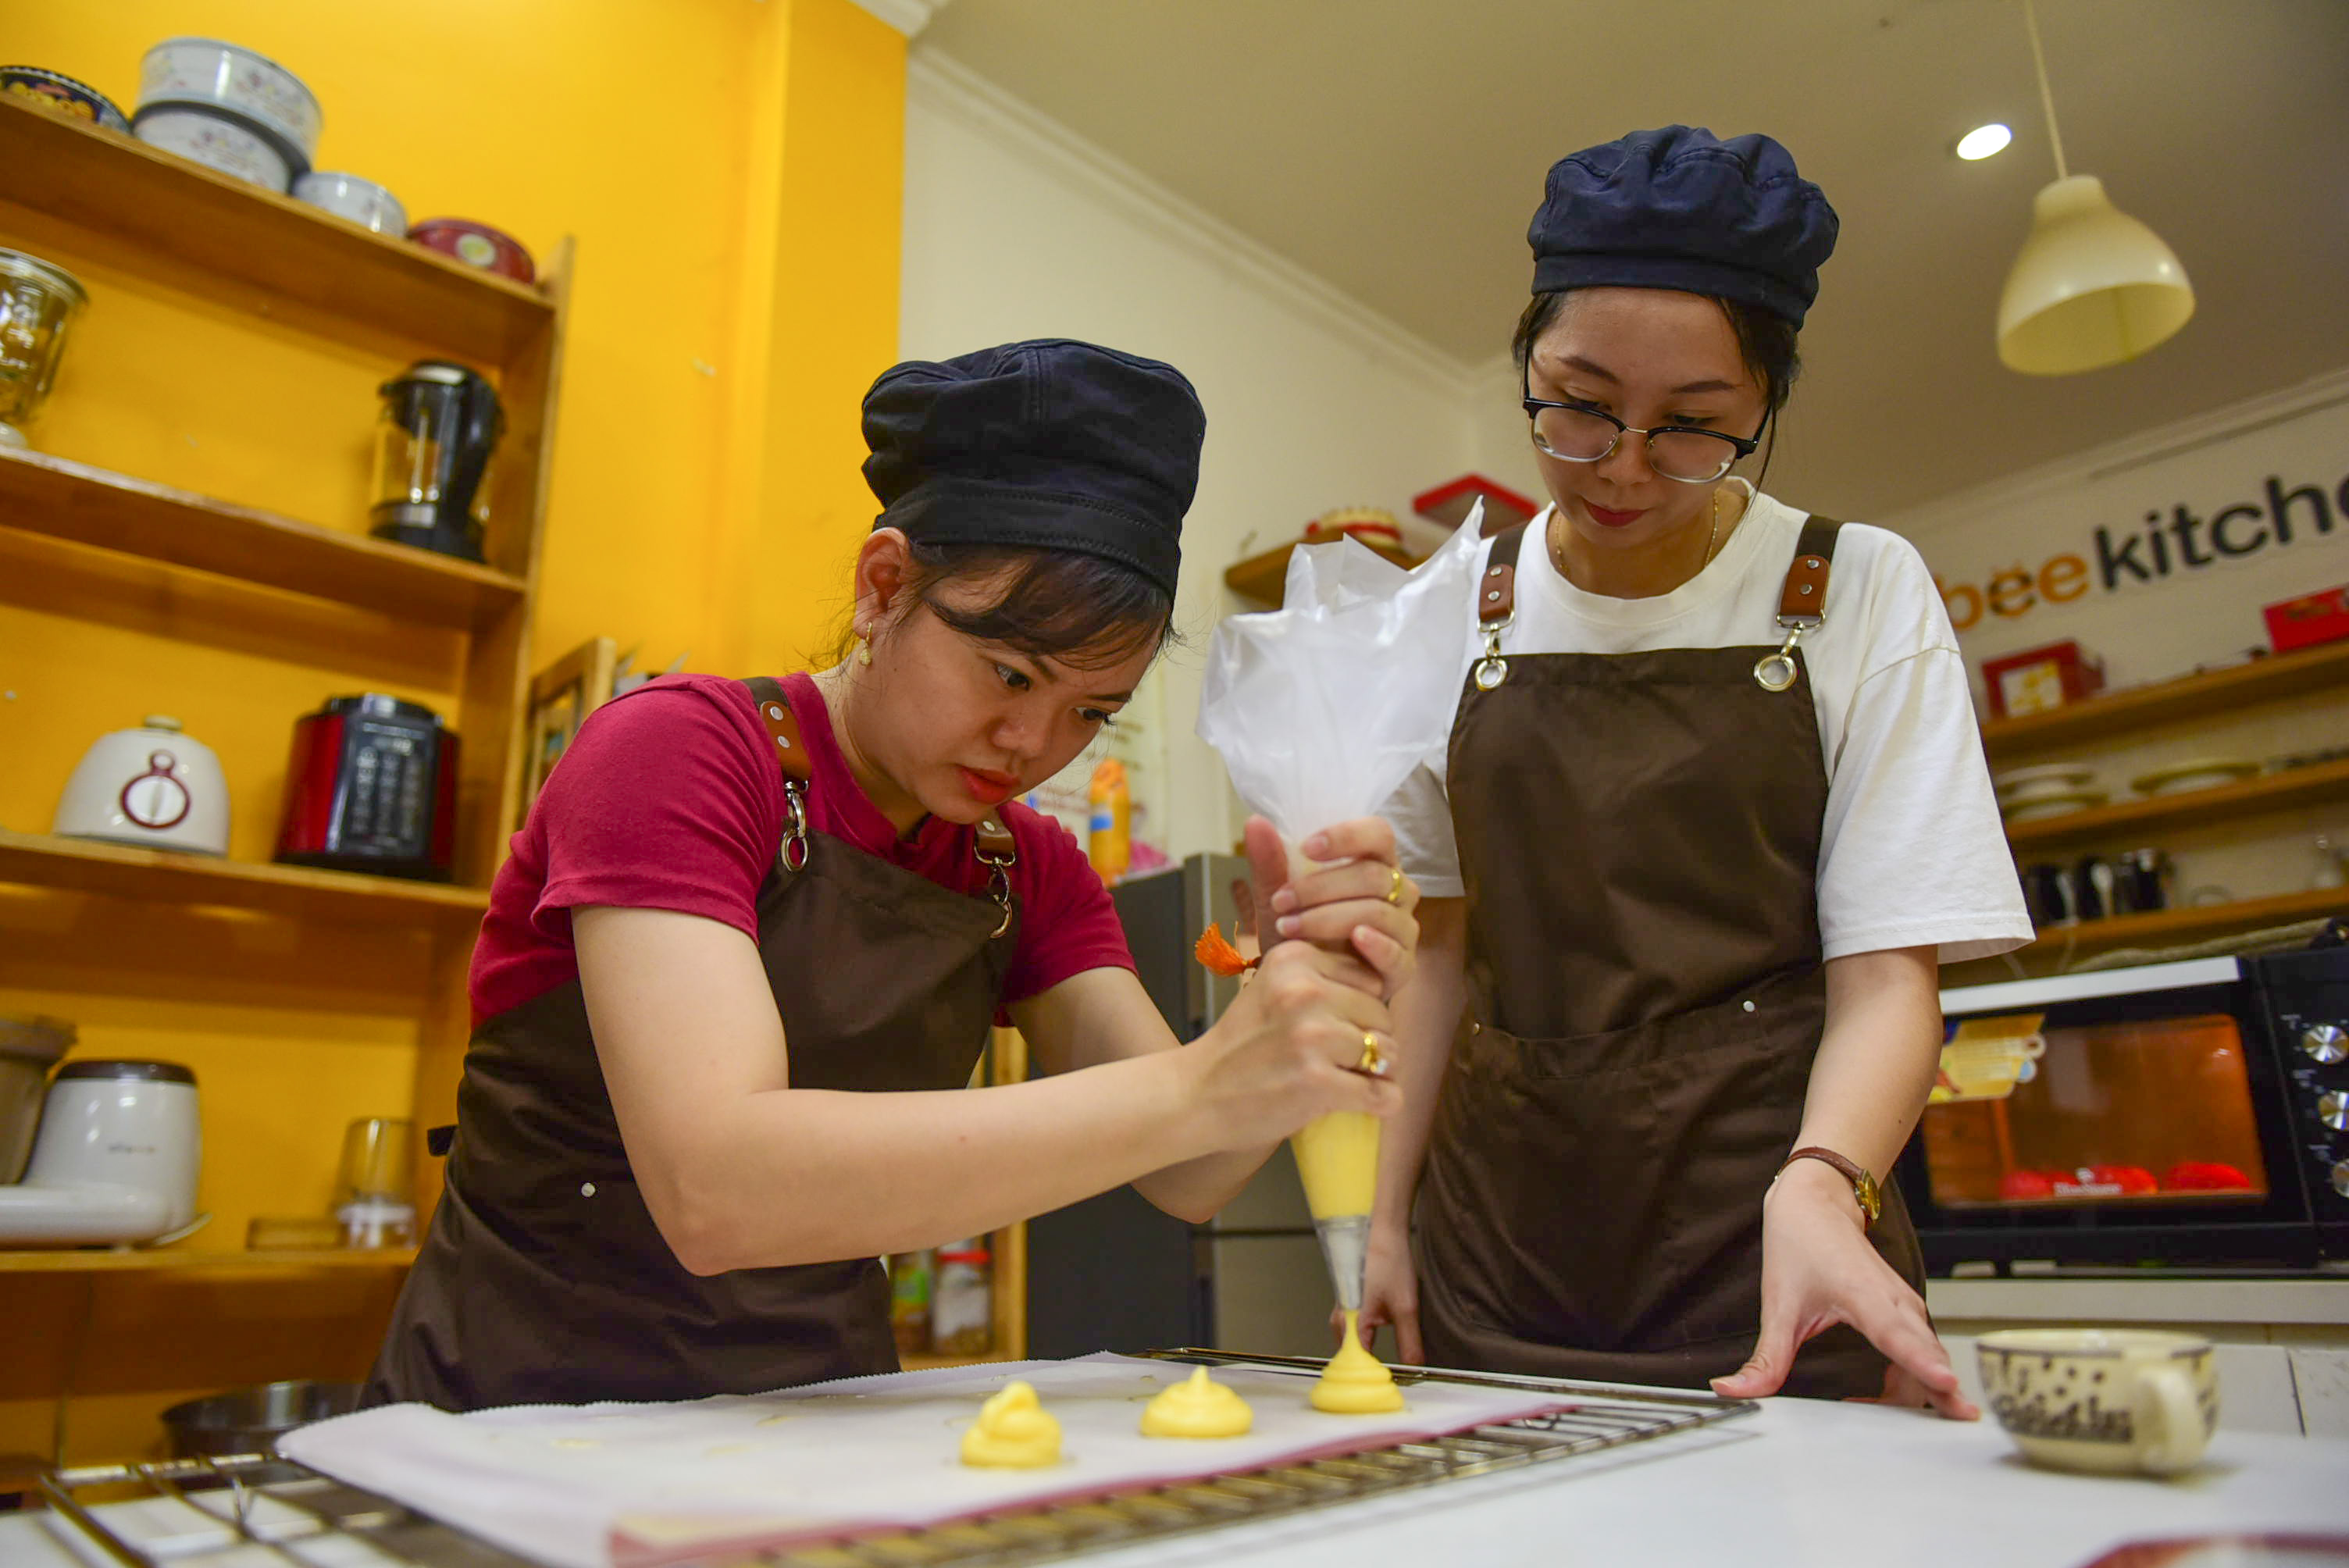 Duong Thi Hong Hanh focuses on making the filling for her Valentine Craquelin puffs at a baking workshop in Ho Chi Minh City on the occasion of Valentine’s Day in 2023. Photo: Ngoc Phuong / Tuoi Tre News